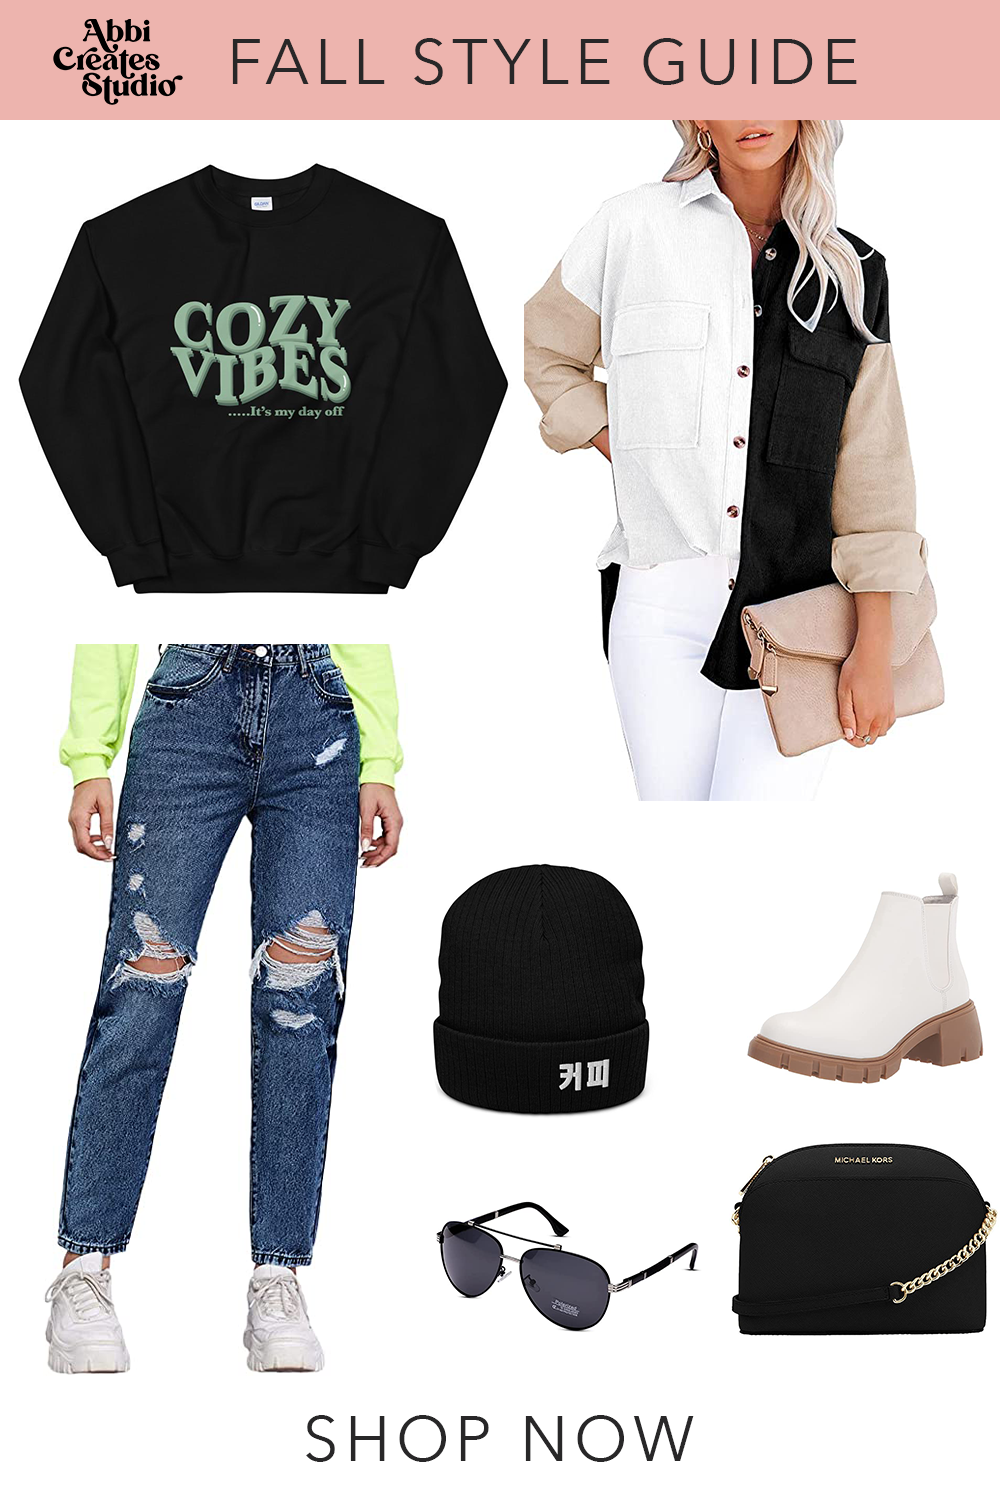 How to style our cozy vibes crewneck